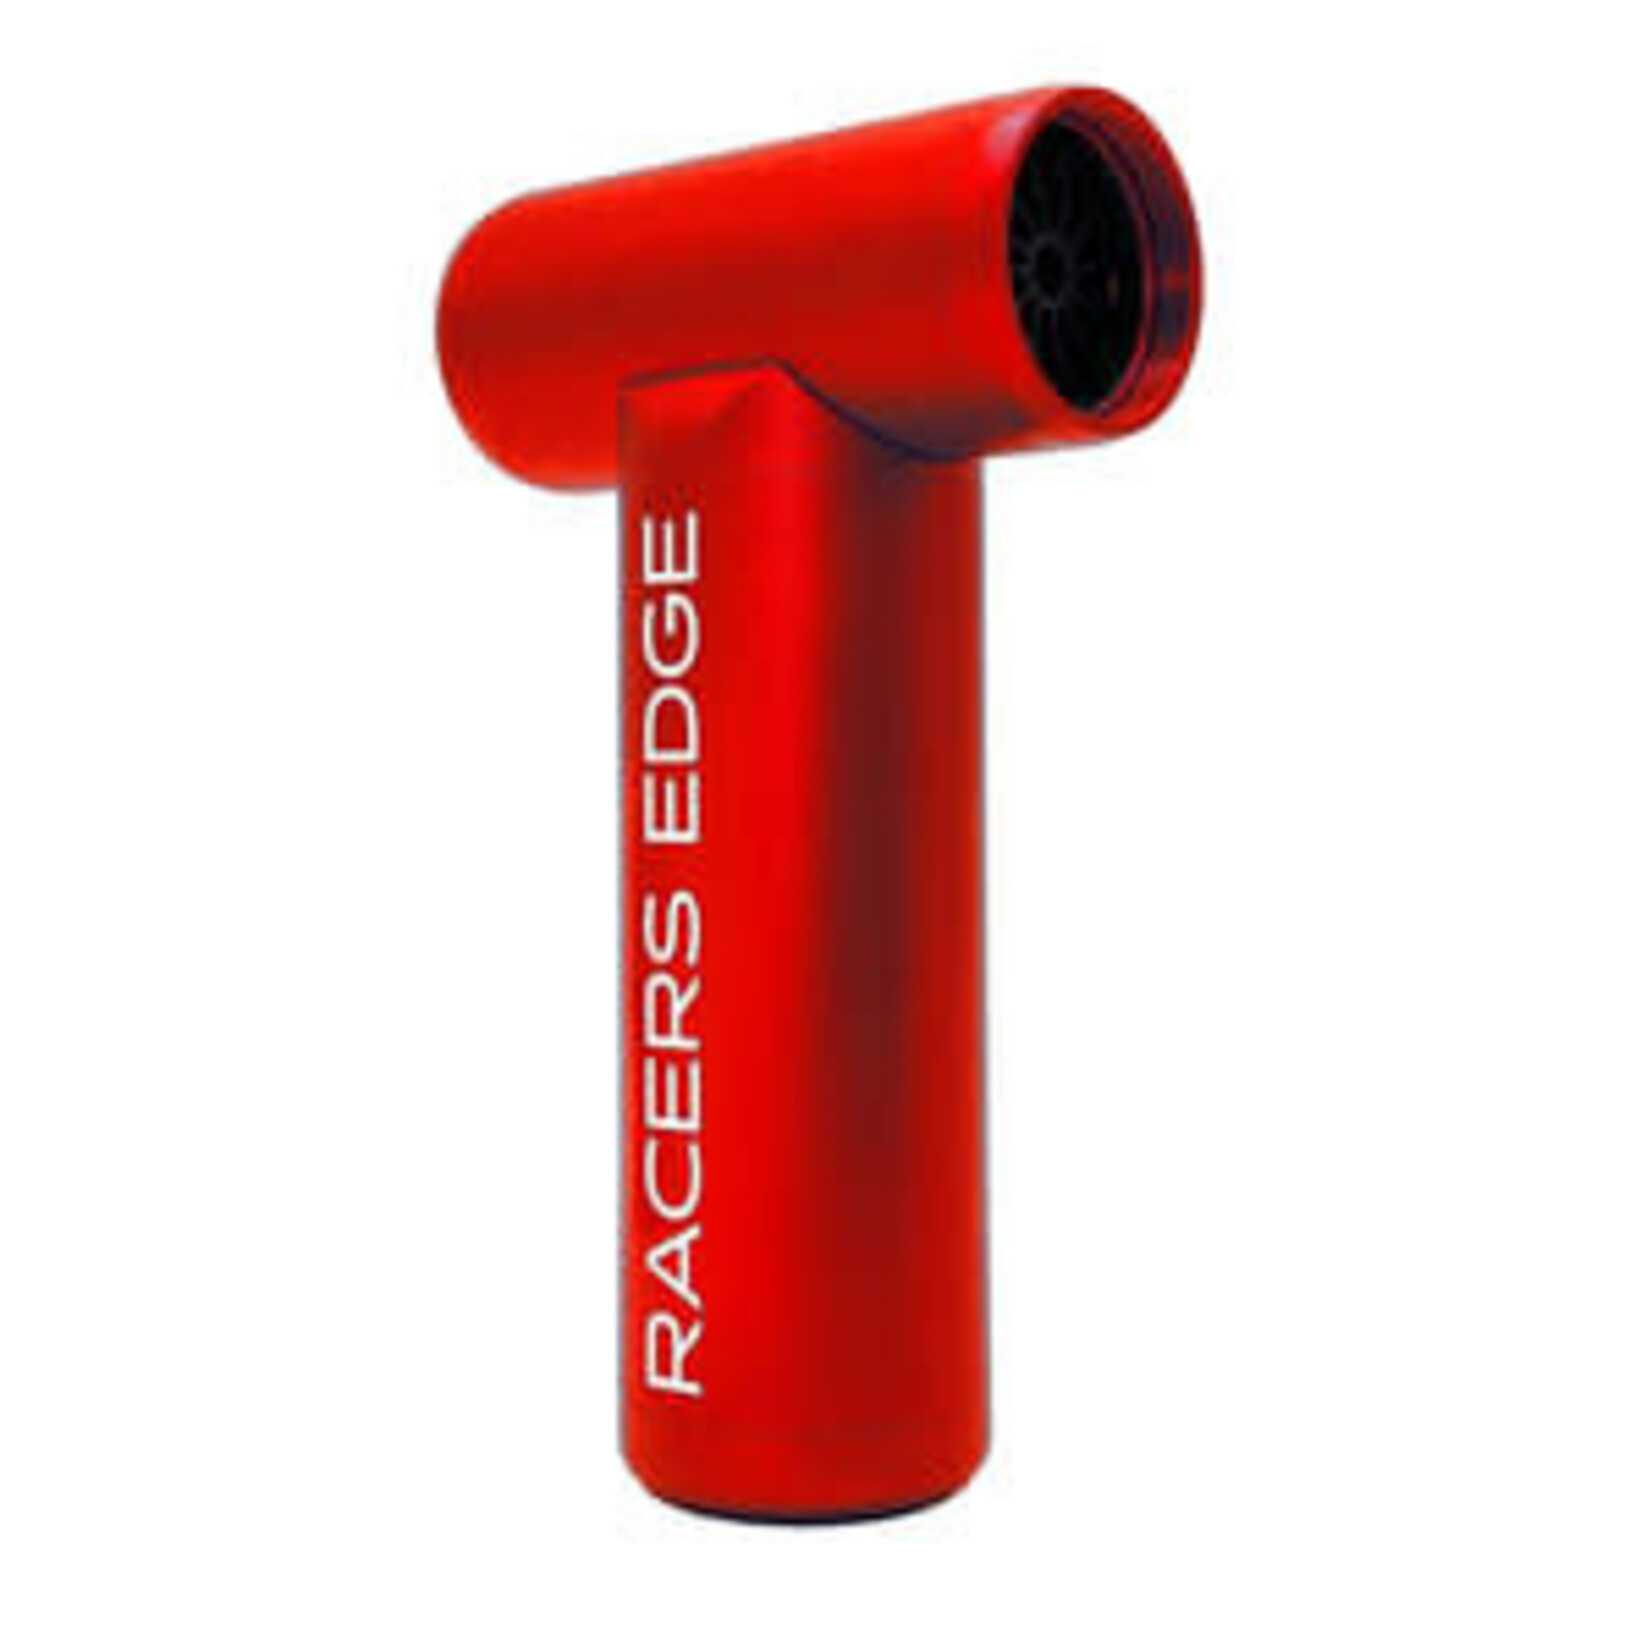 Racers Edge PRO Portable Power Duster with Multi-level Fan, Red